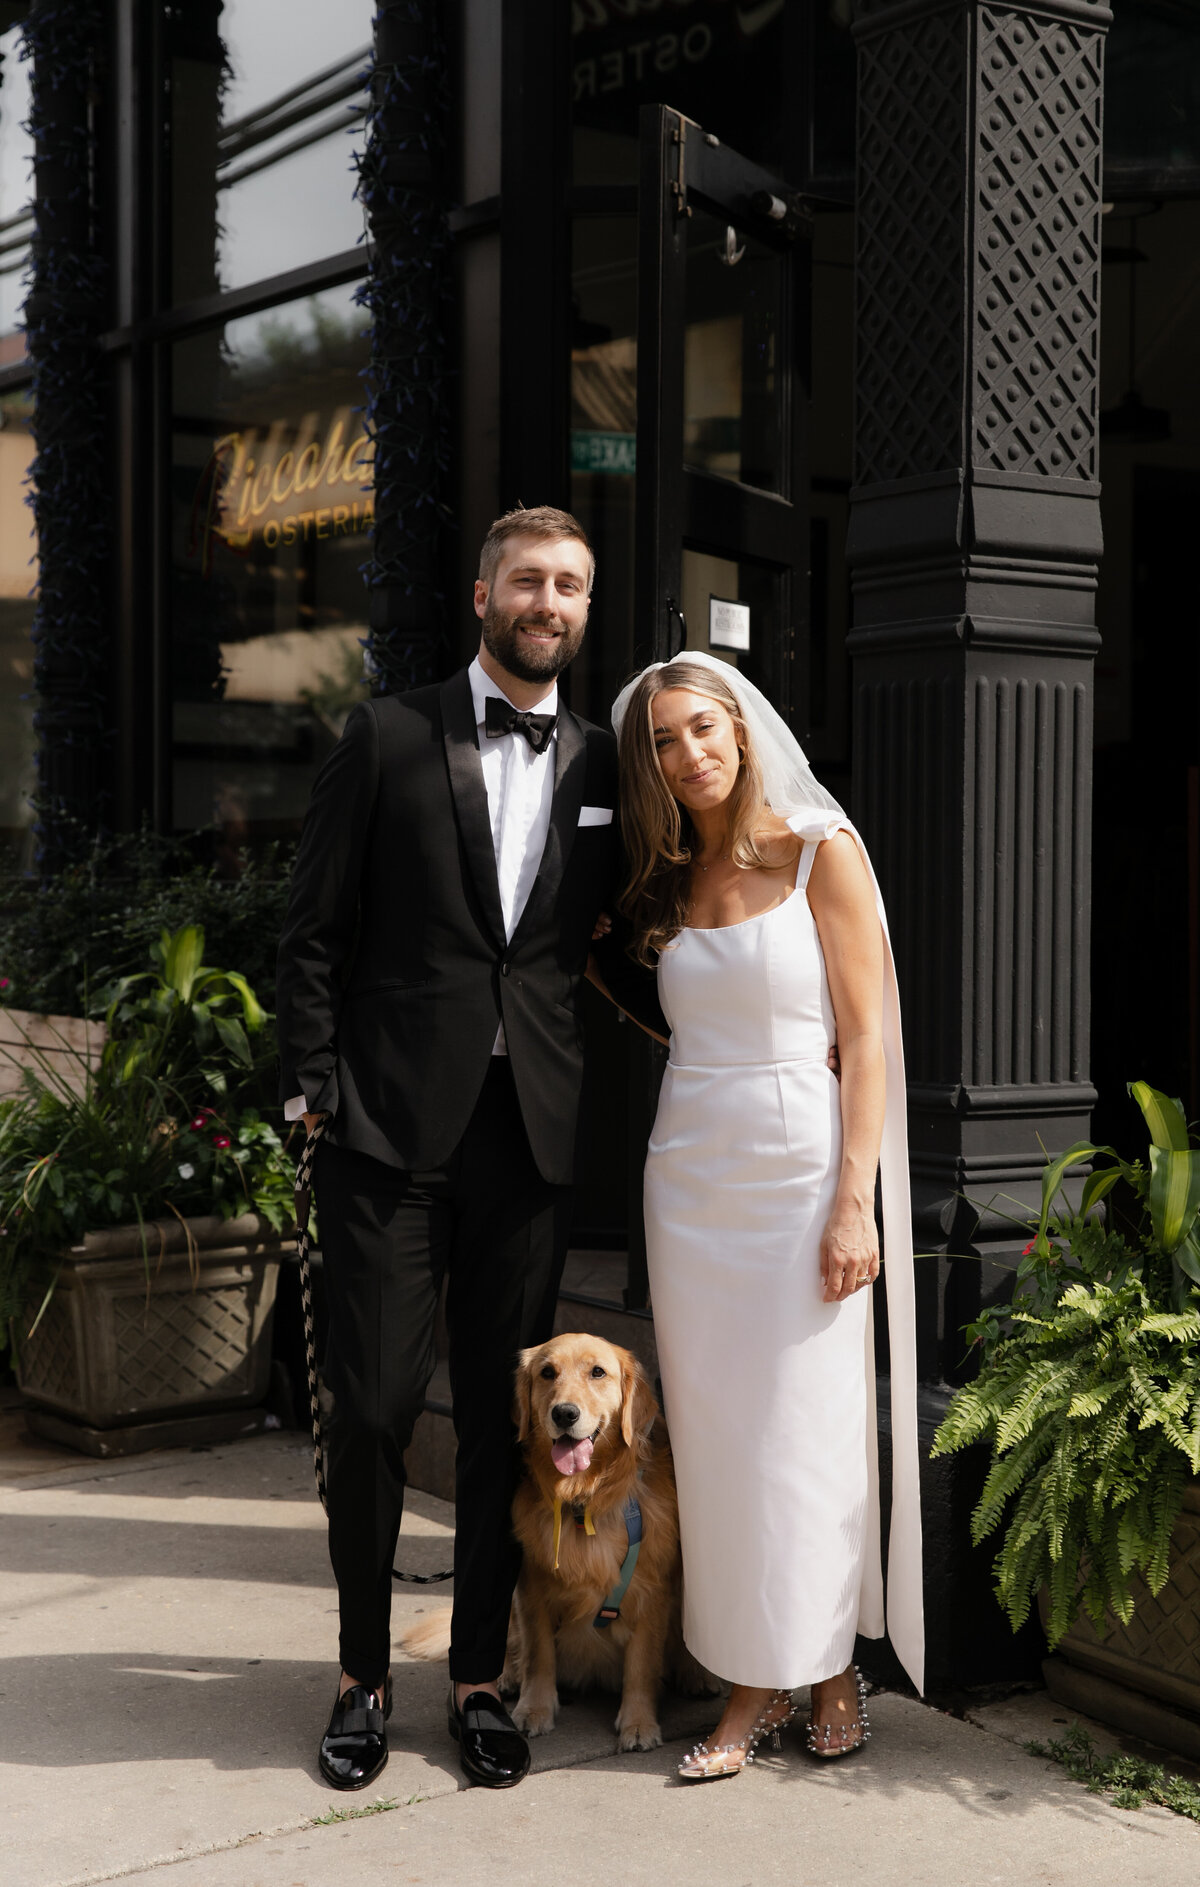 Bride in simple, modern, white dress and veil stands next to groom in tuxedo outside of Elske Restaurant with their dog at wedding ceremony.